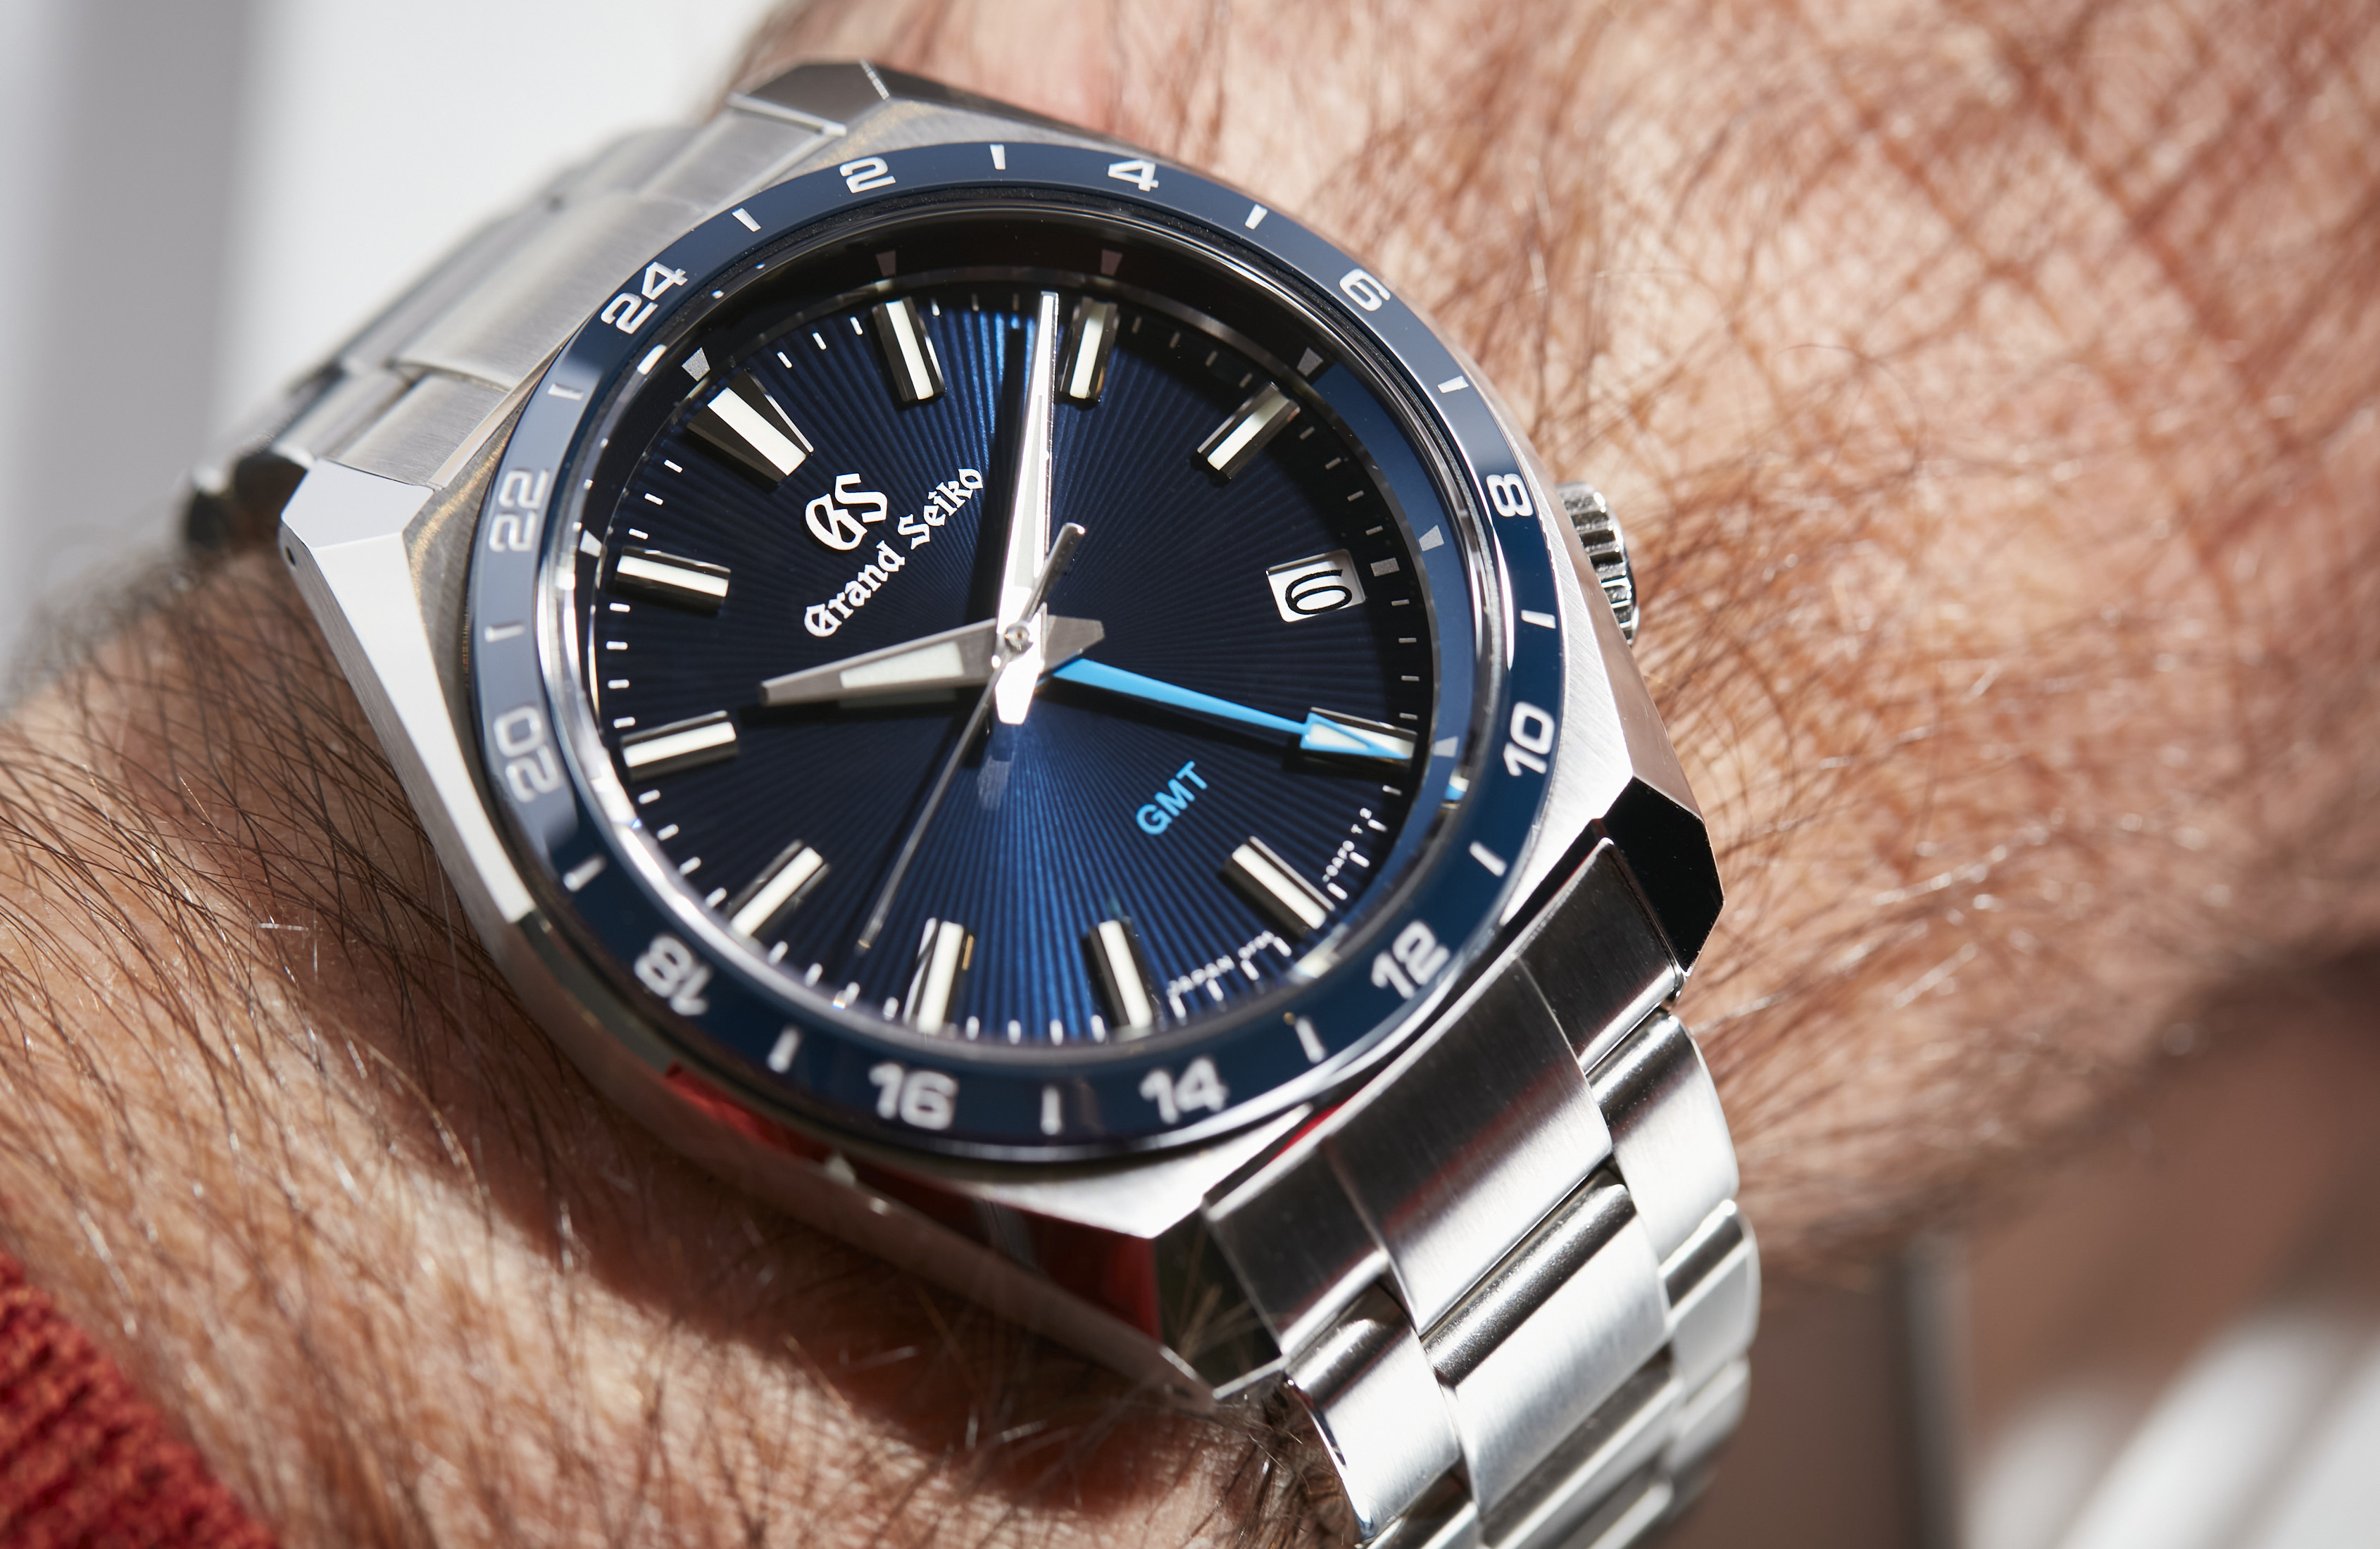 HANDS-ON: The Grand Seiko SBGN019 and SBGN021 are 